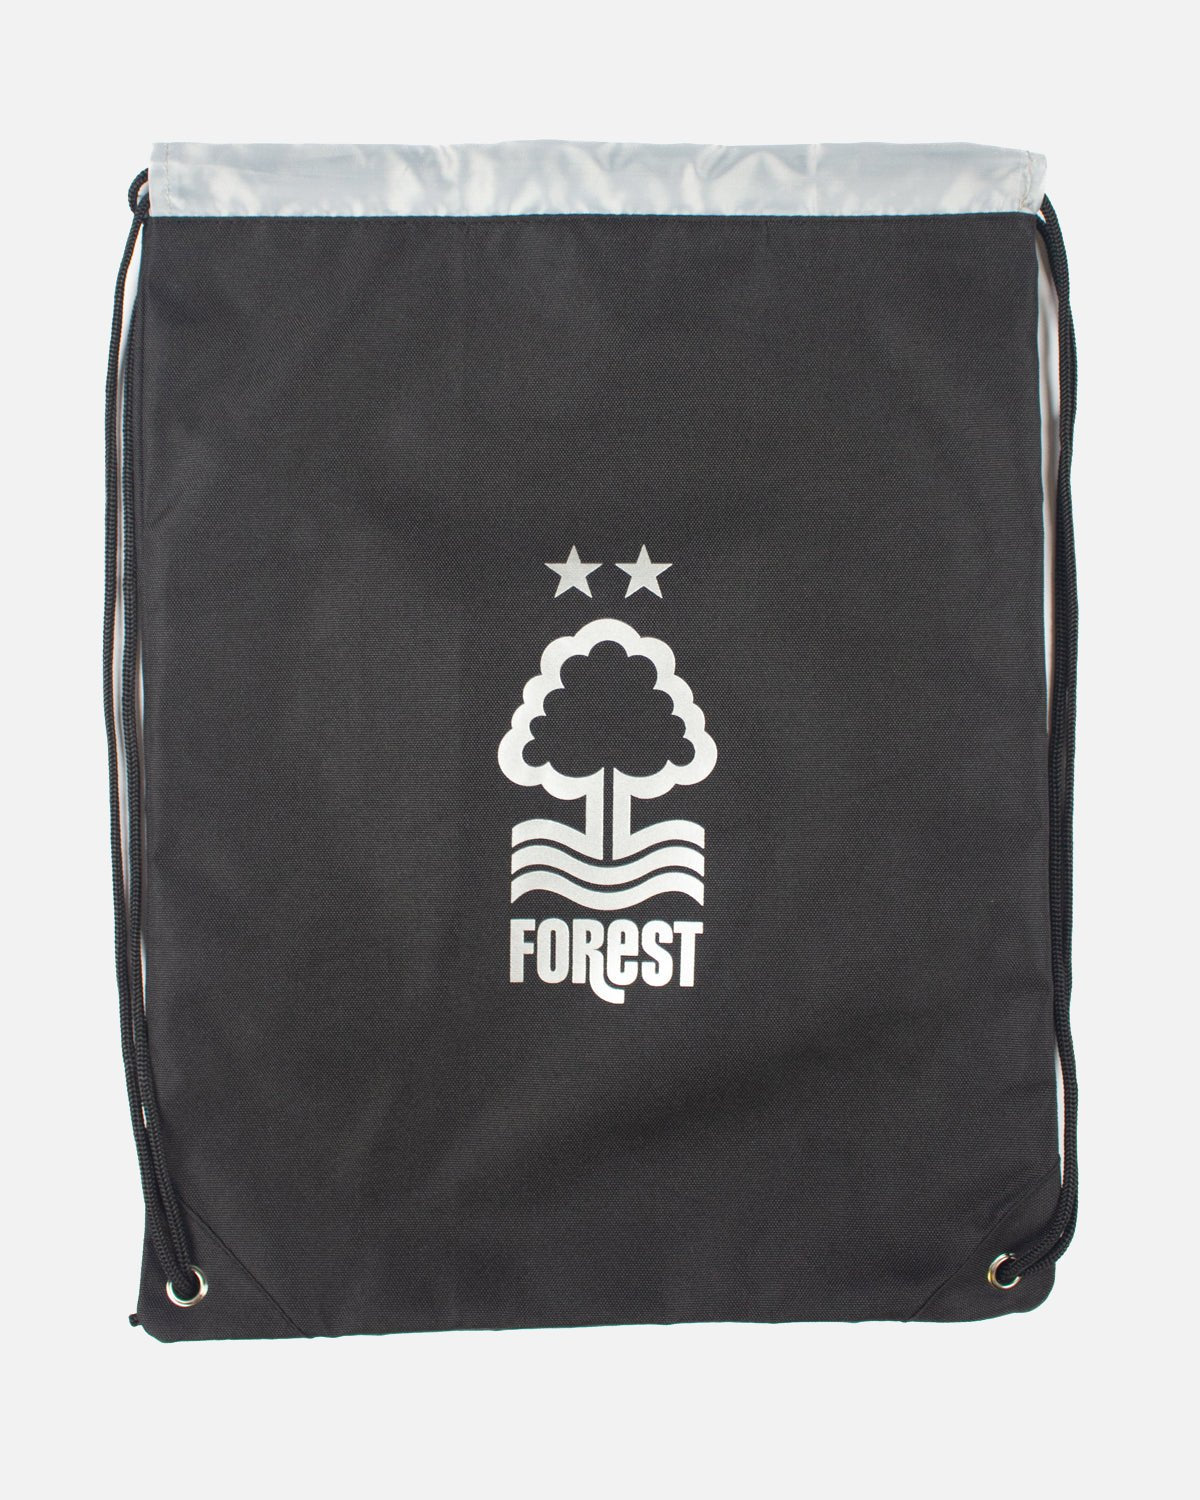 NFFC Recycled Gym Bag - Nottingham Forest FC